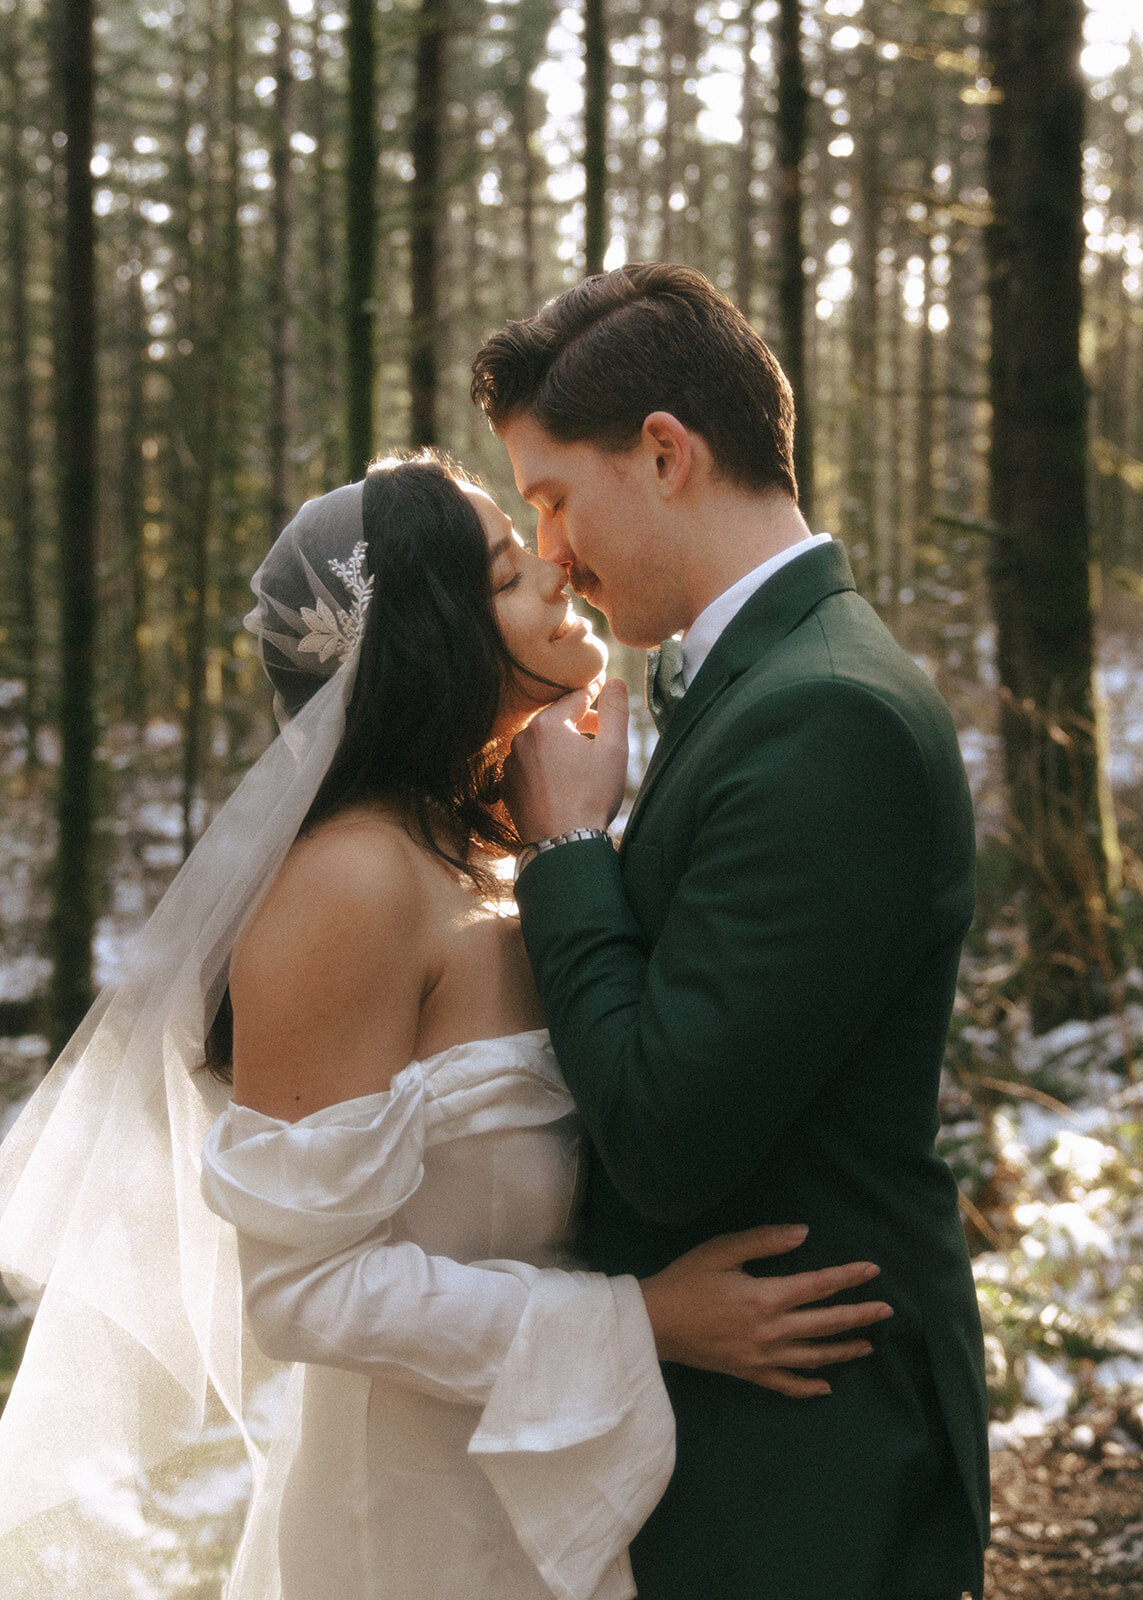 bc-vancouver-island-elopement-photographer-taylor-dawning-photography-forest-winter-boho-vintage-elopement-photos-29